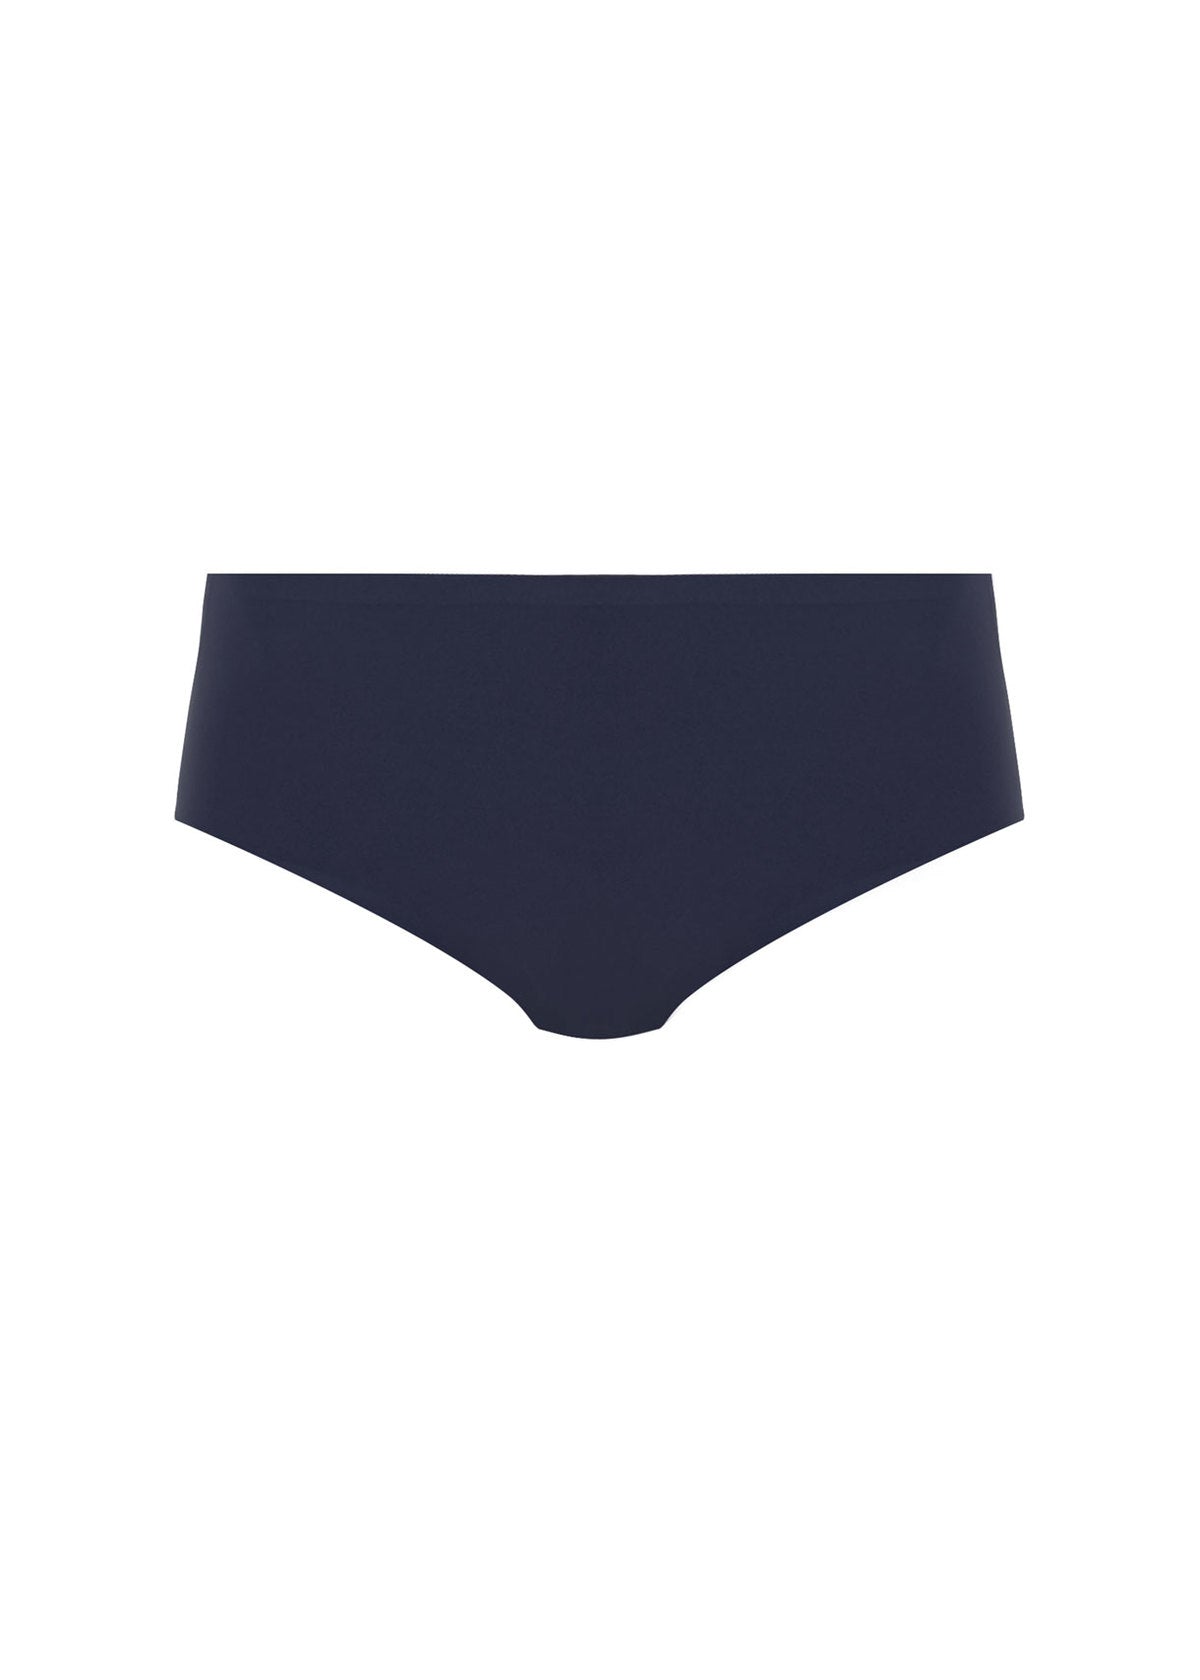 Smoothease Invisible Stretch Brief - Navy